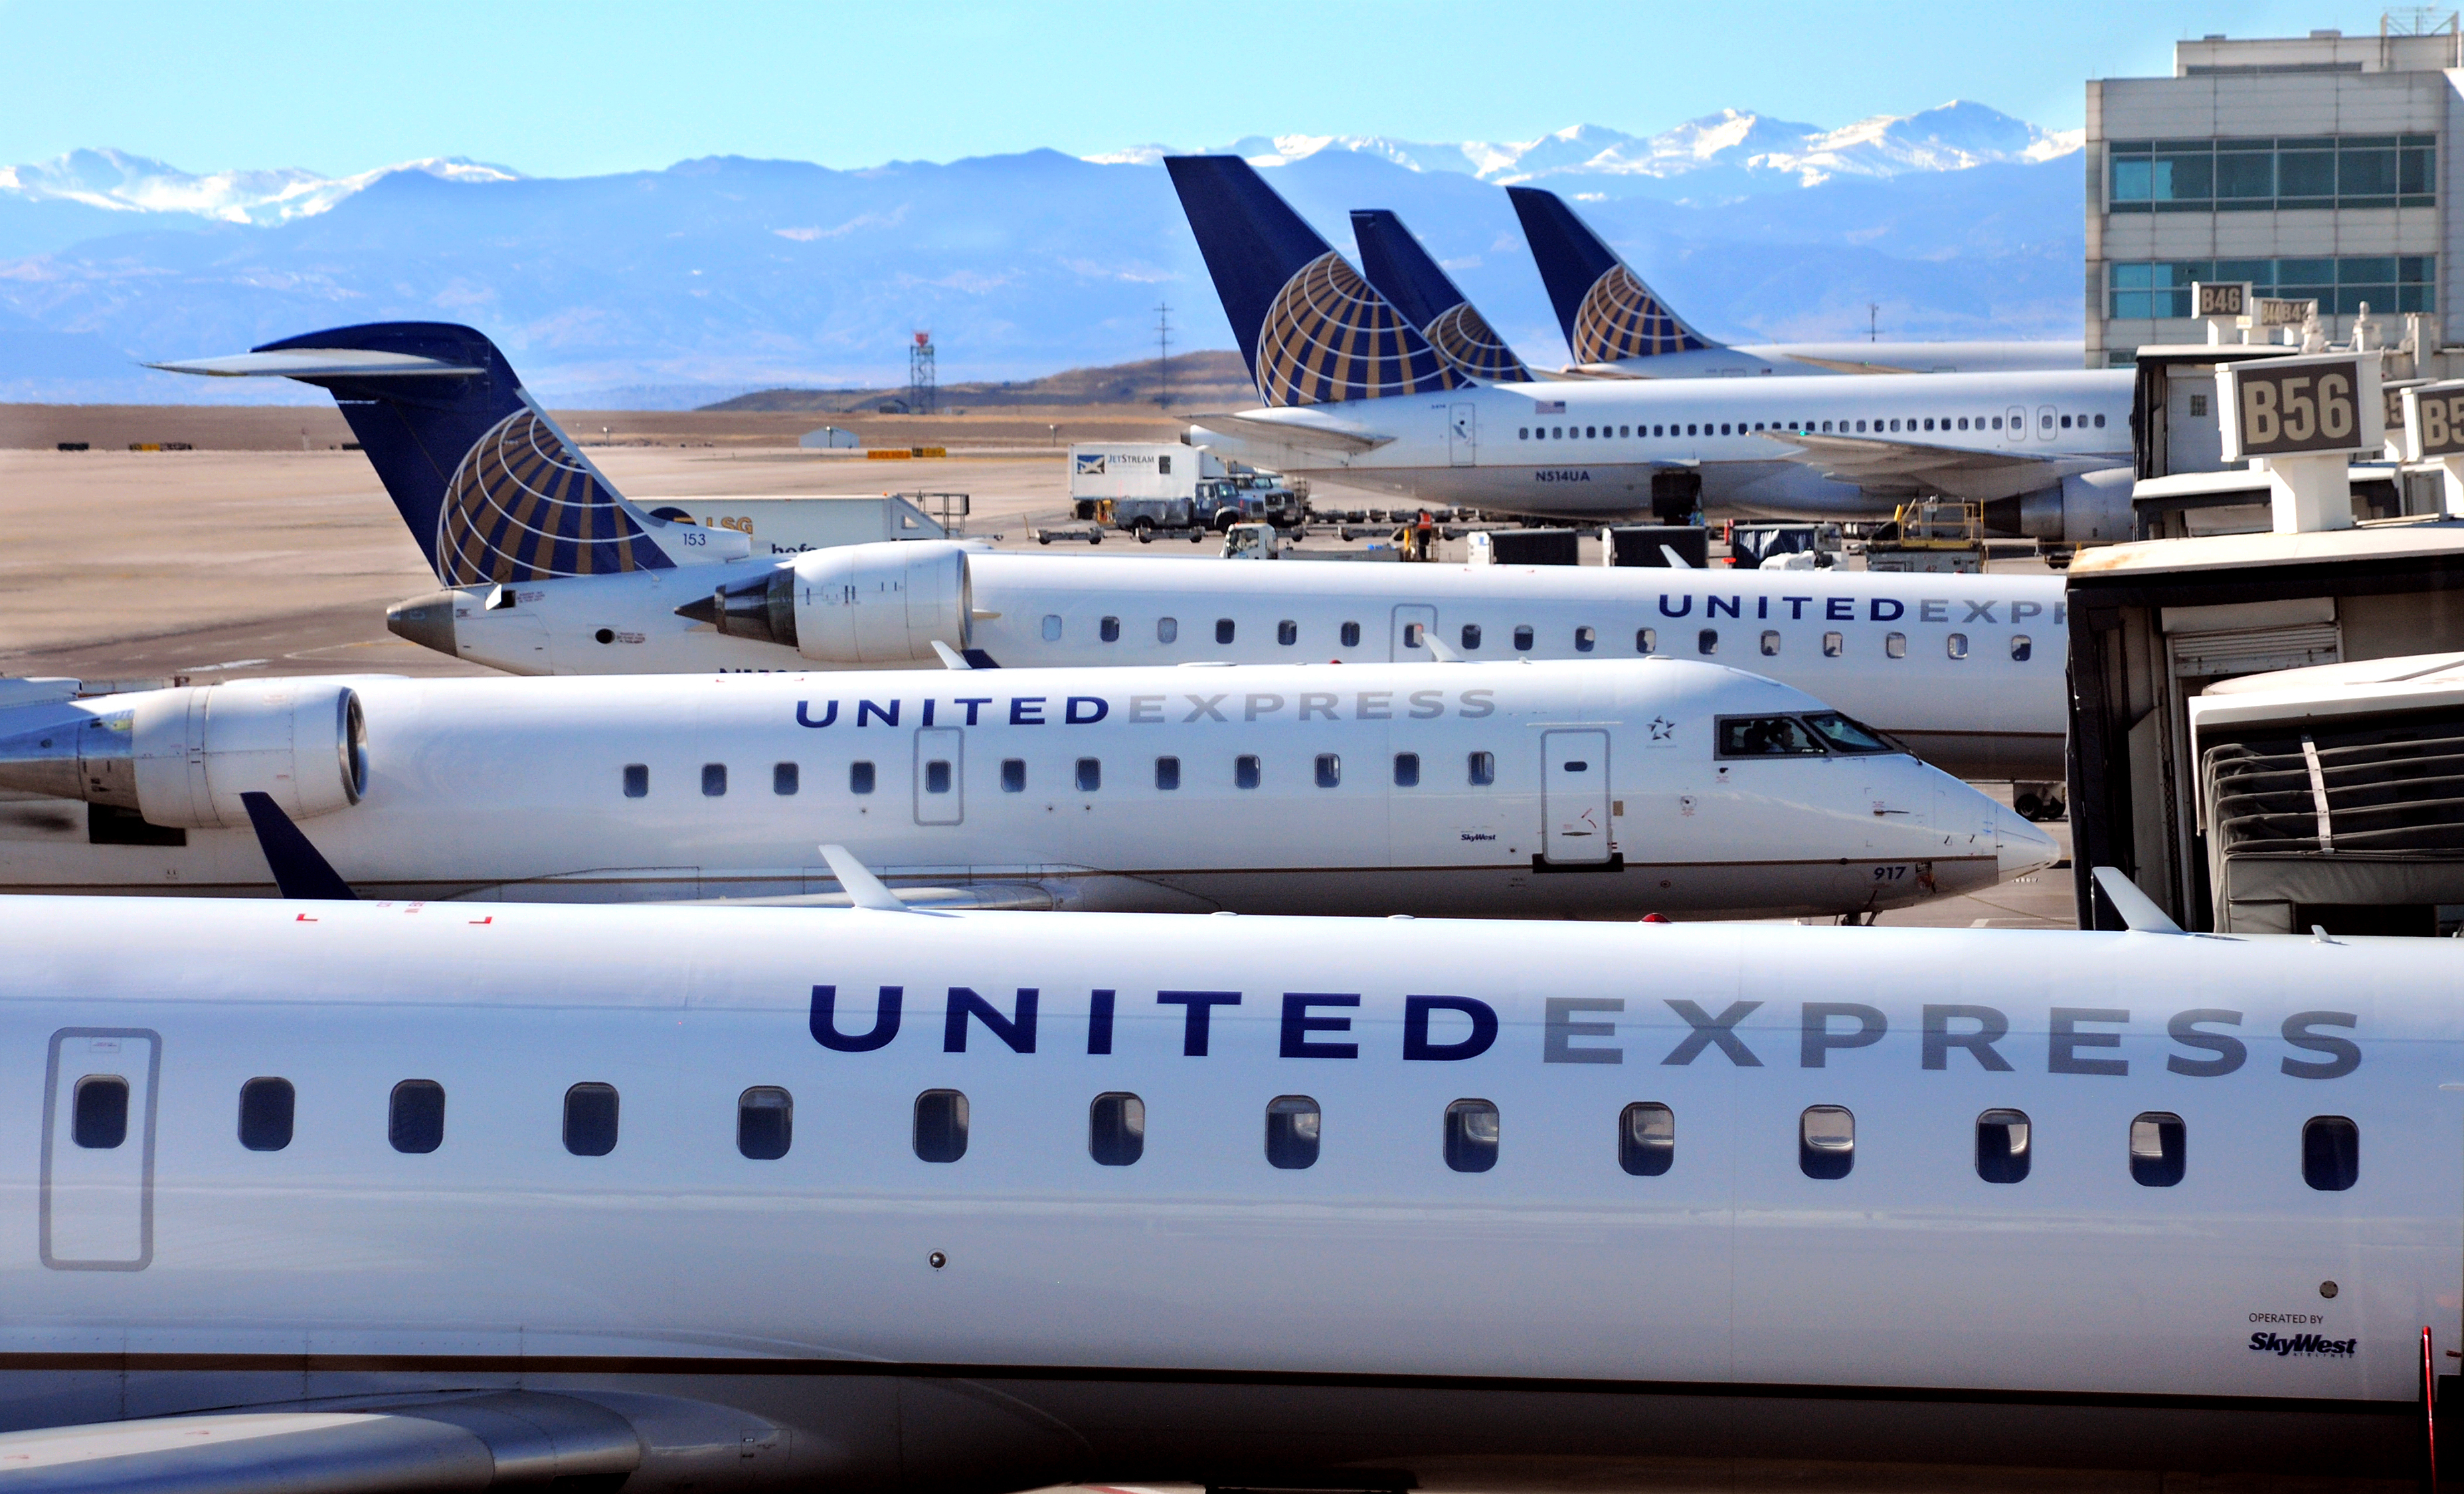 United Express passenger jets are lined up at the gates at Denver International Airport in Denver, Colorado—January 19, 2014. (Robert Alexander&amp;mdash;Getty Images)